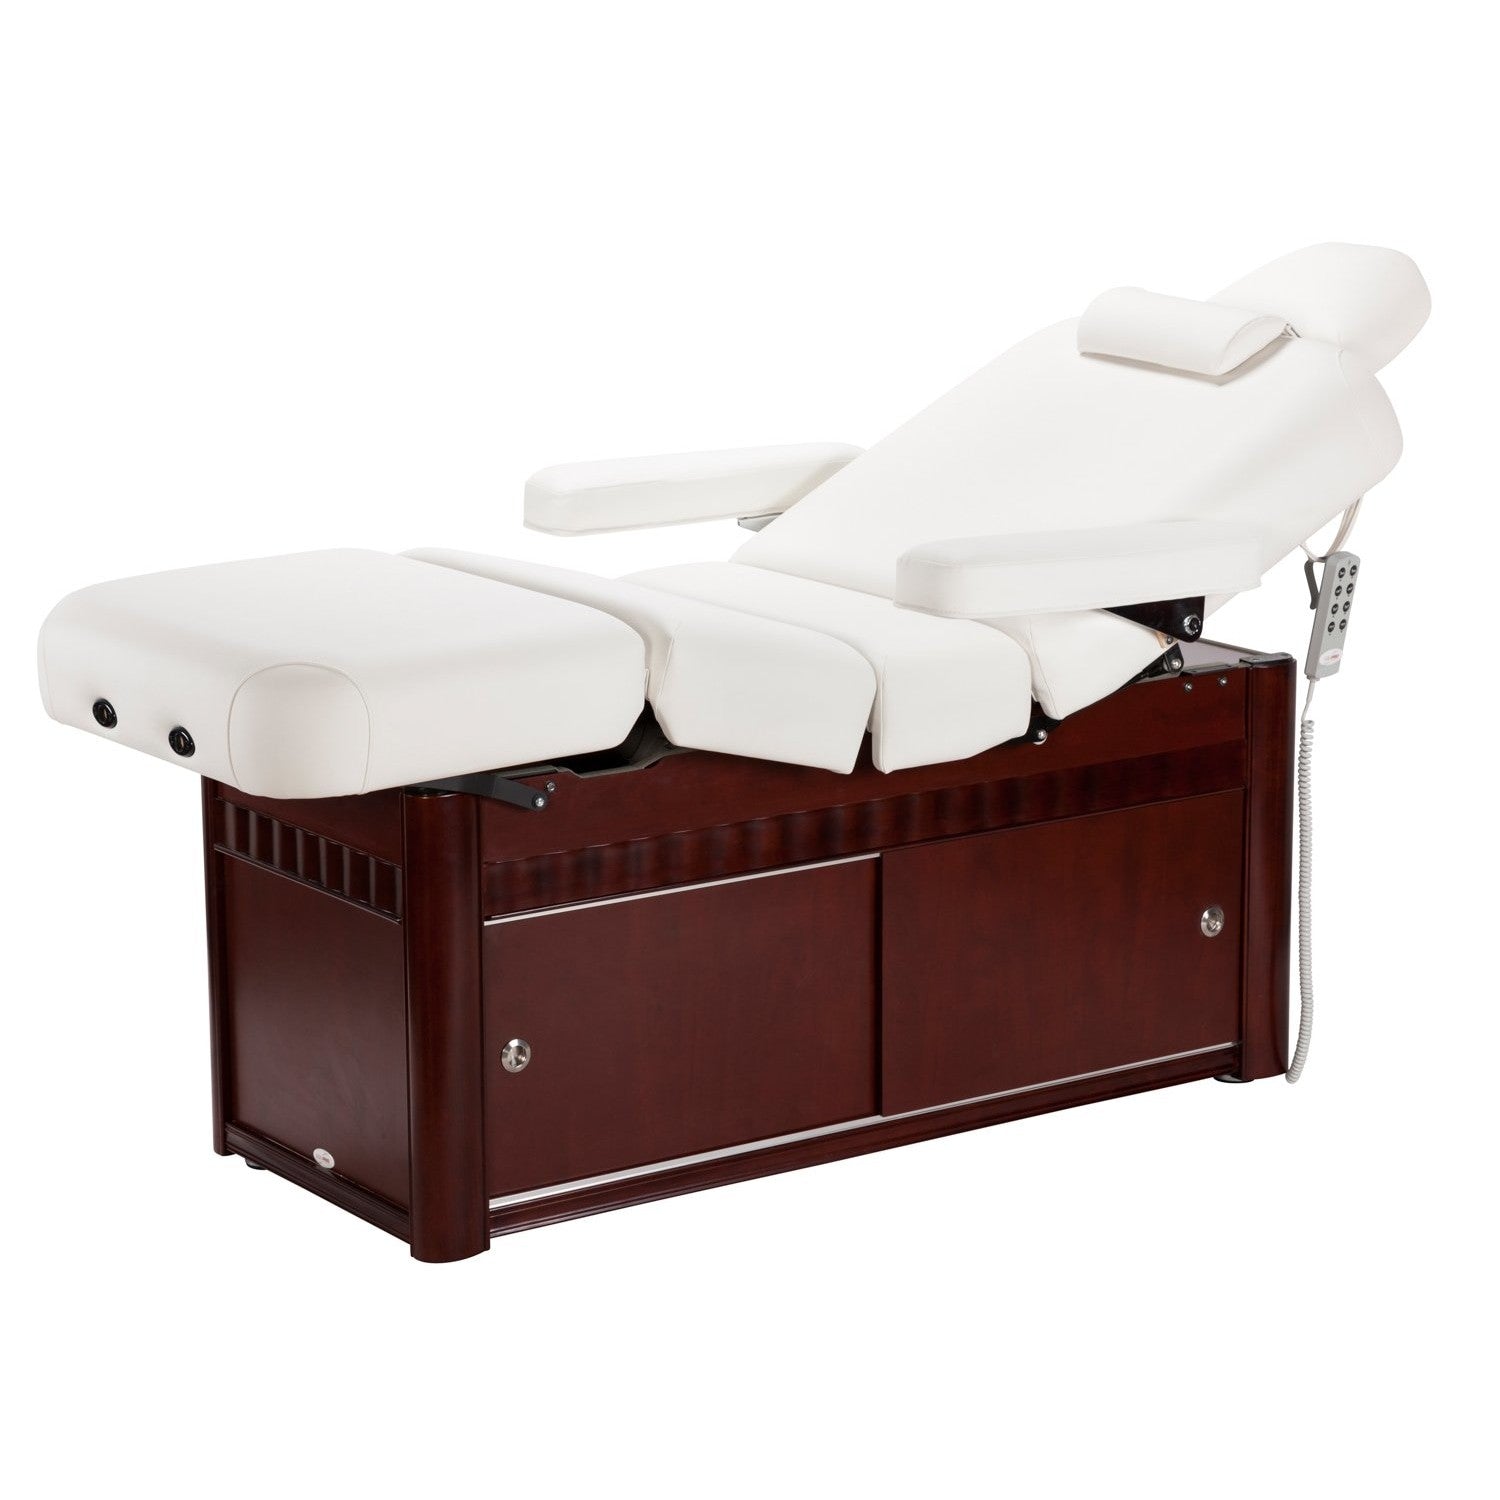 Equipro Equipro Electric Murano Therapeutic Massage Facial Bed Massage & Treatment Table - ChairsThatGive